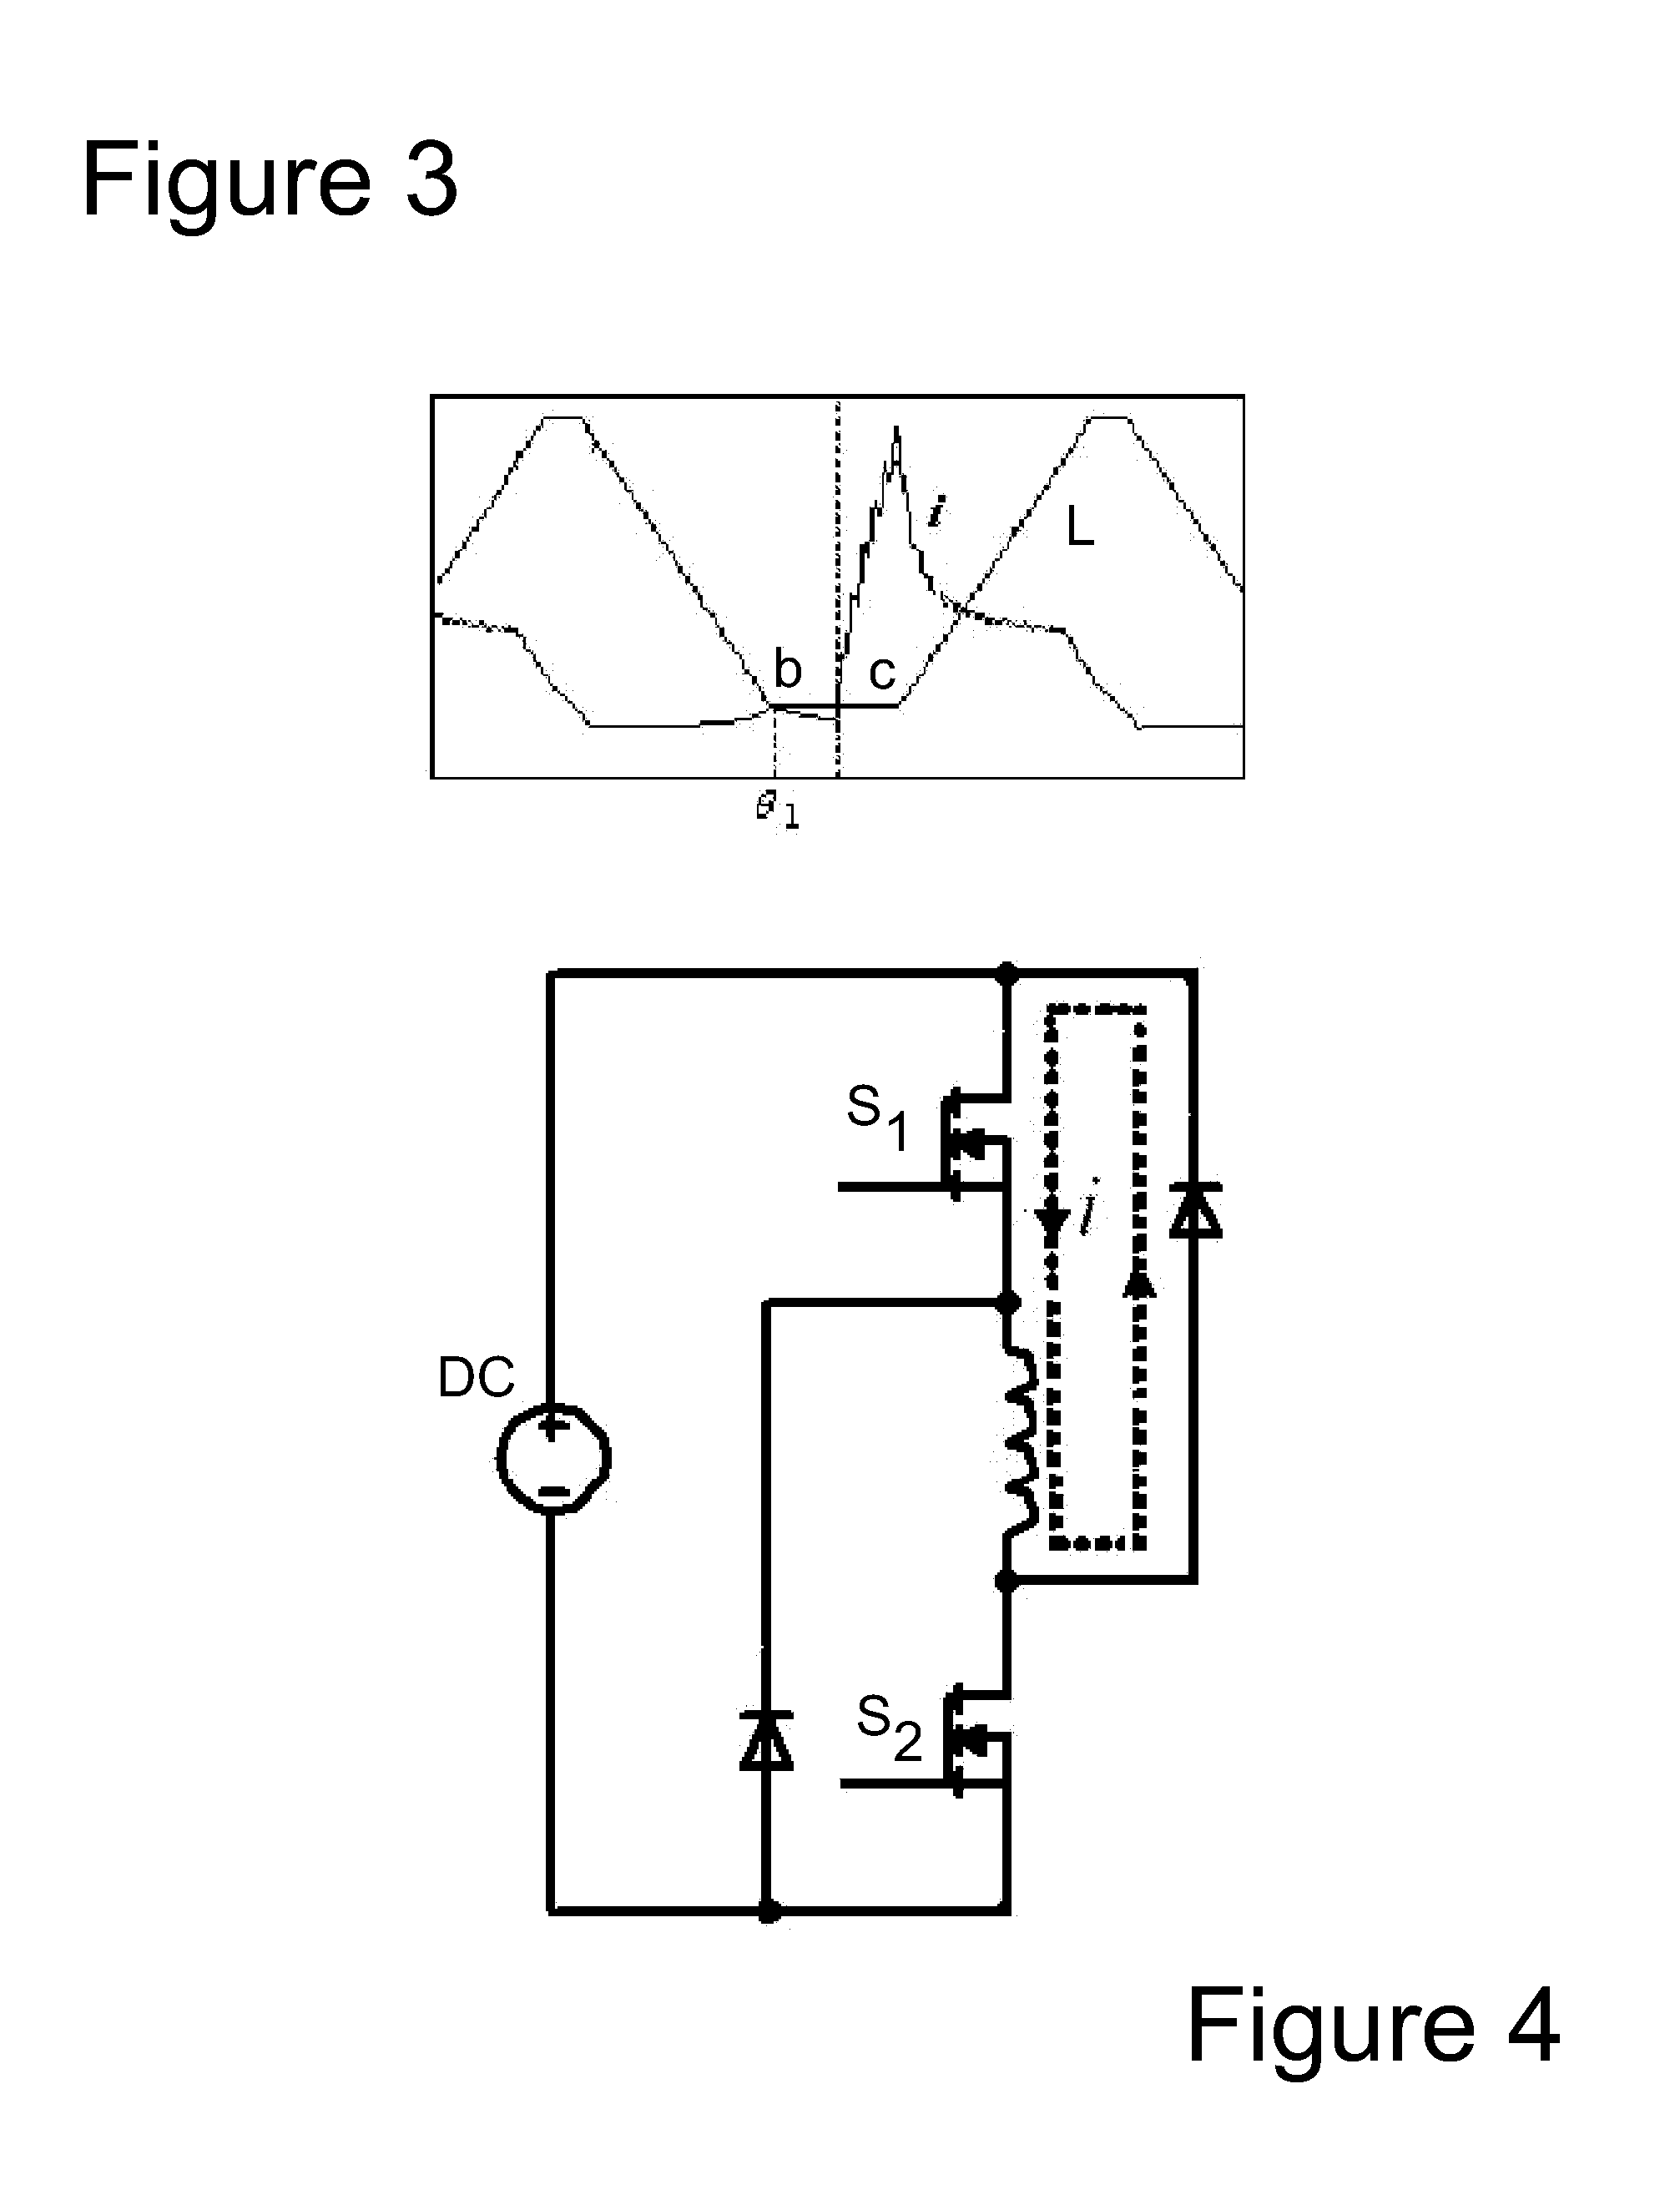 Position Sensorless Step-Wise Freewheeling Control Method for Switched Reluctance Motor